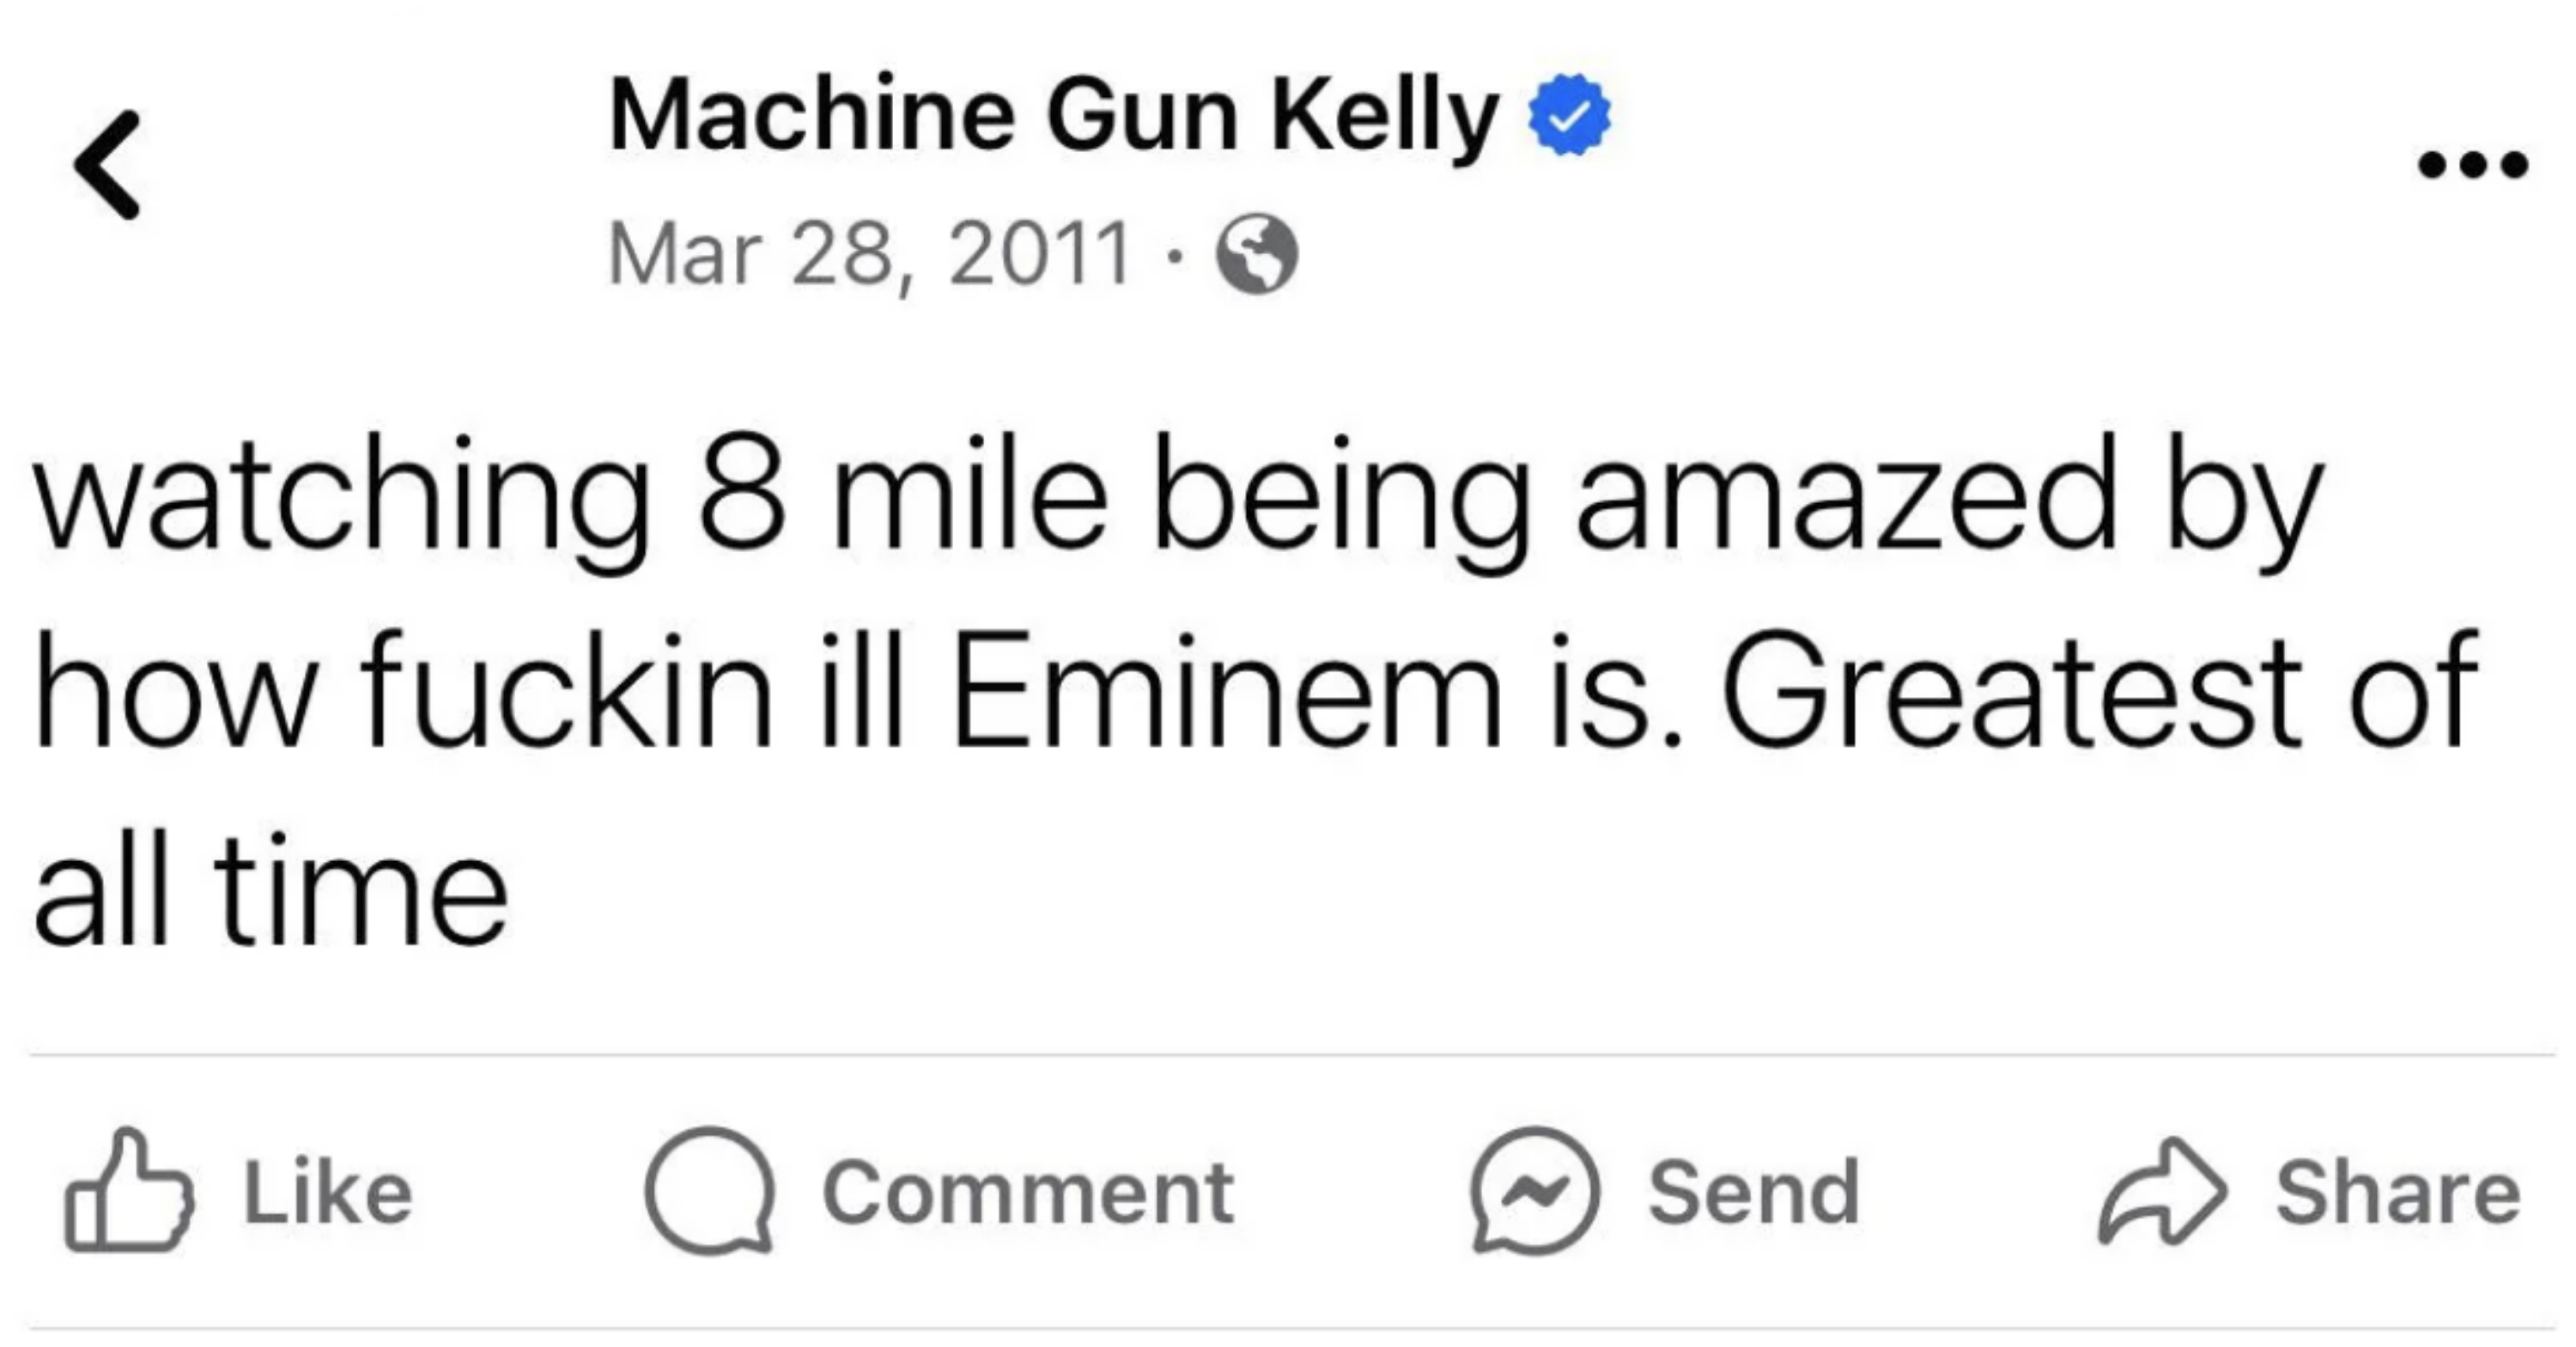 Tweet from Machine Gun Kelly expressing admiration for Eminem while watching 8 Mile, dated Mar 28, 2011